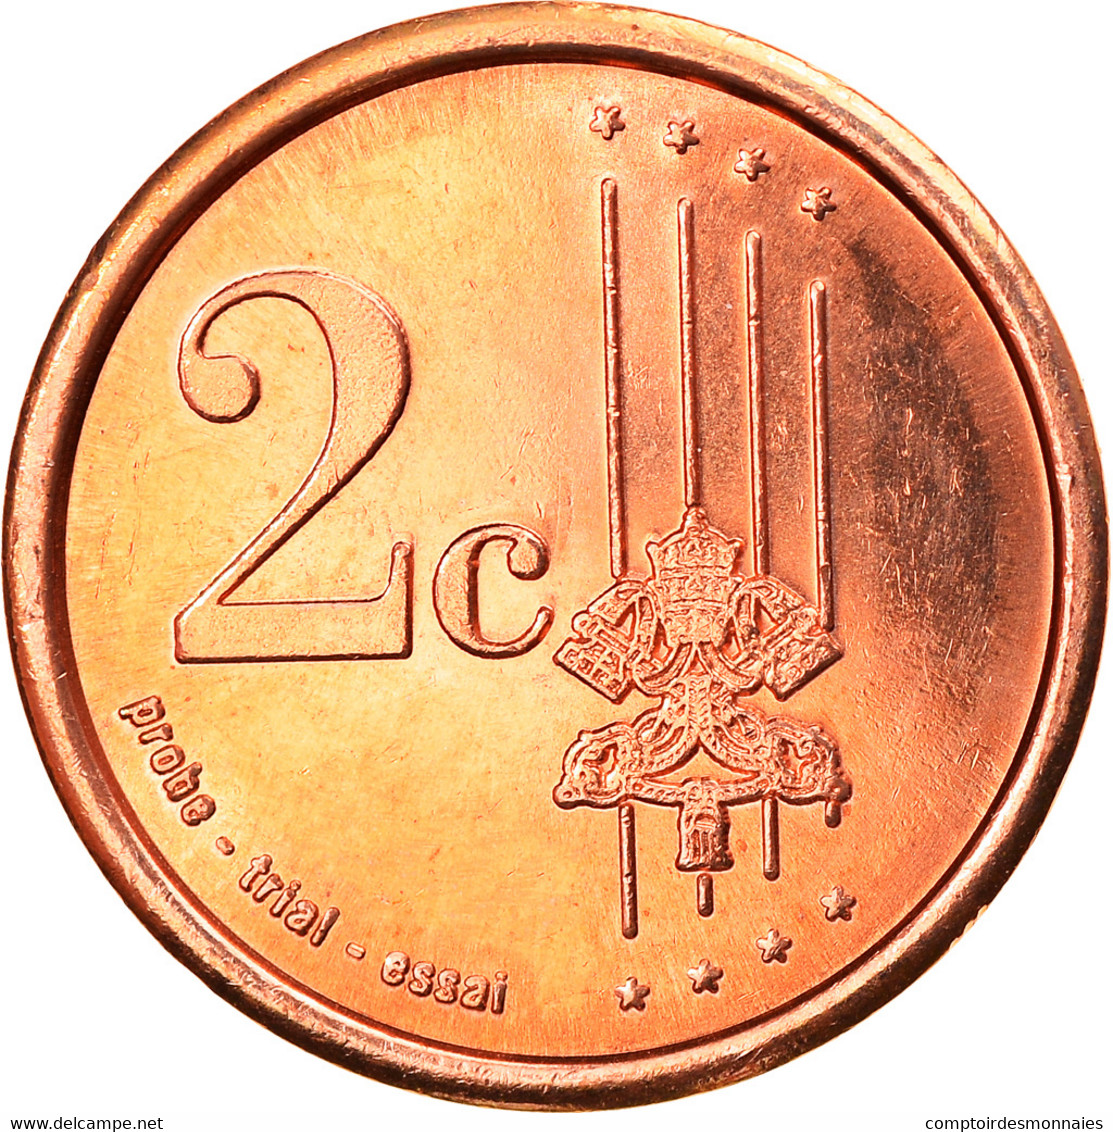 Vatican, 2 Euro Cent, 2007, Unofficial Private Coin, FDC, Copper Plated Steel - Private Proofs / Unofficial